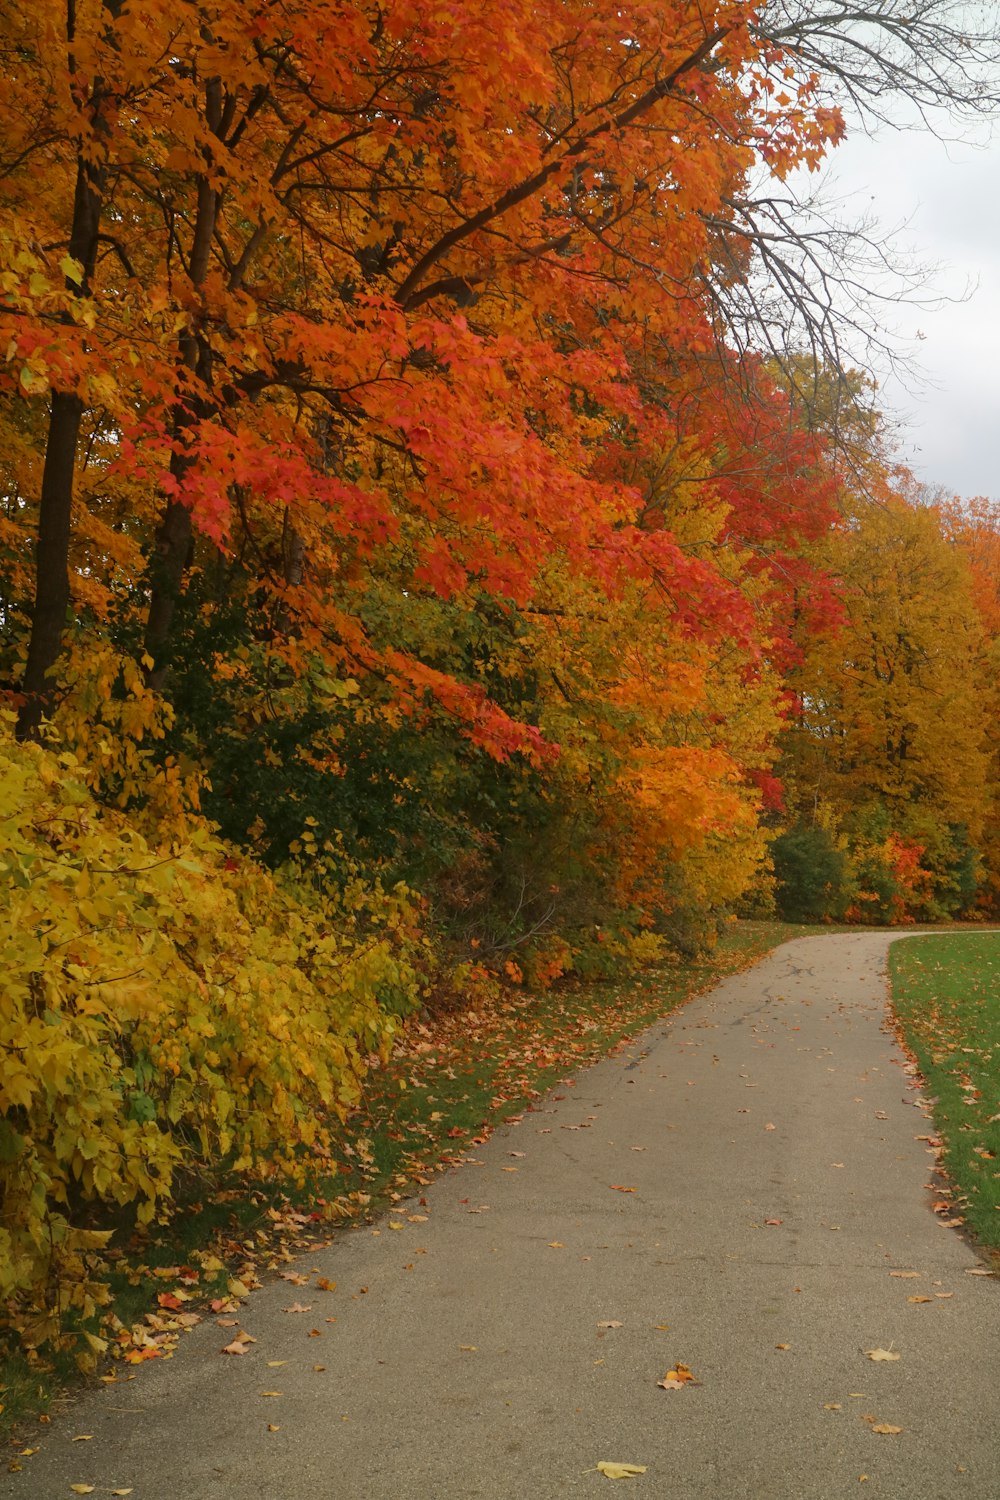 a path in a park with lots of trees with orange and yellow leaves